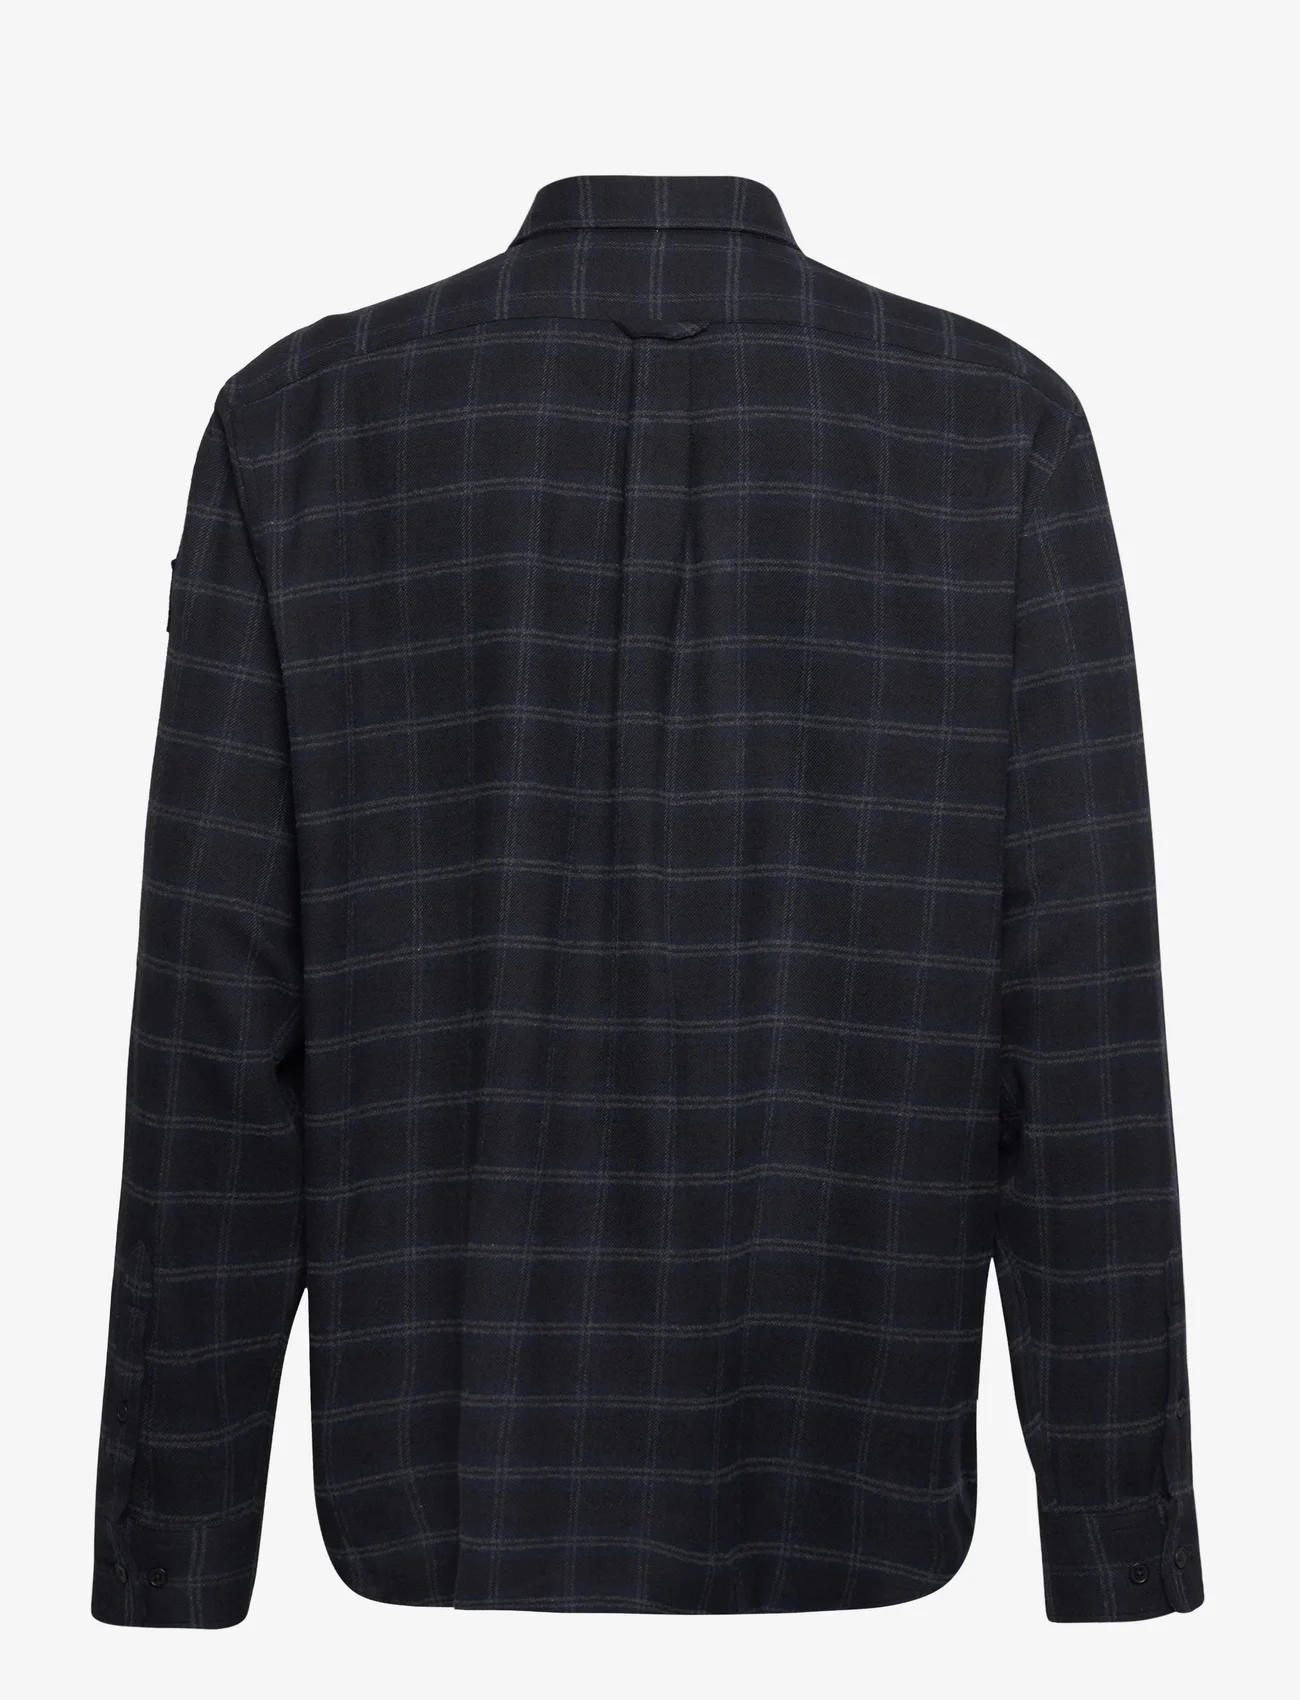 Belstaff - SCALE CHECK SHIRT - casual shirts - navy/charcoal - 1